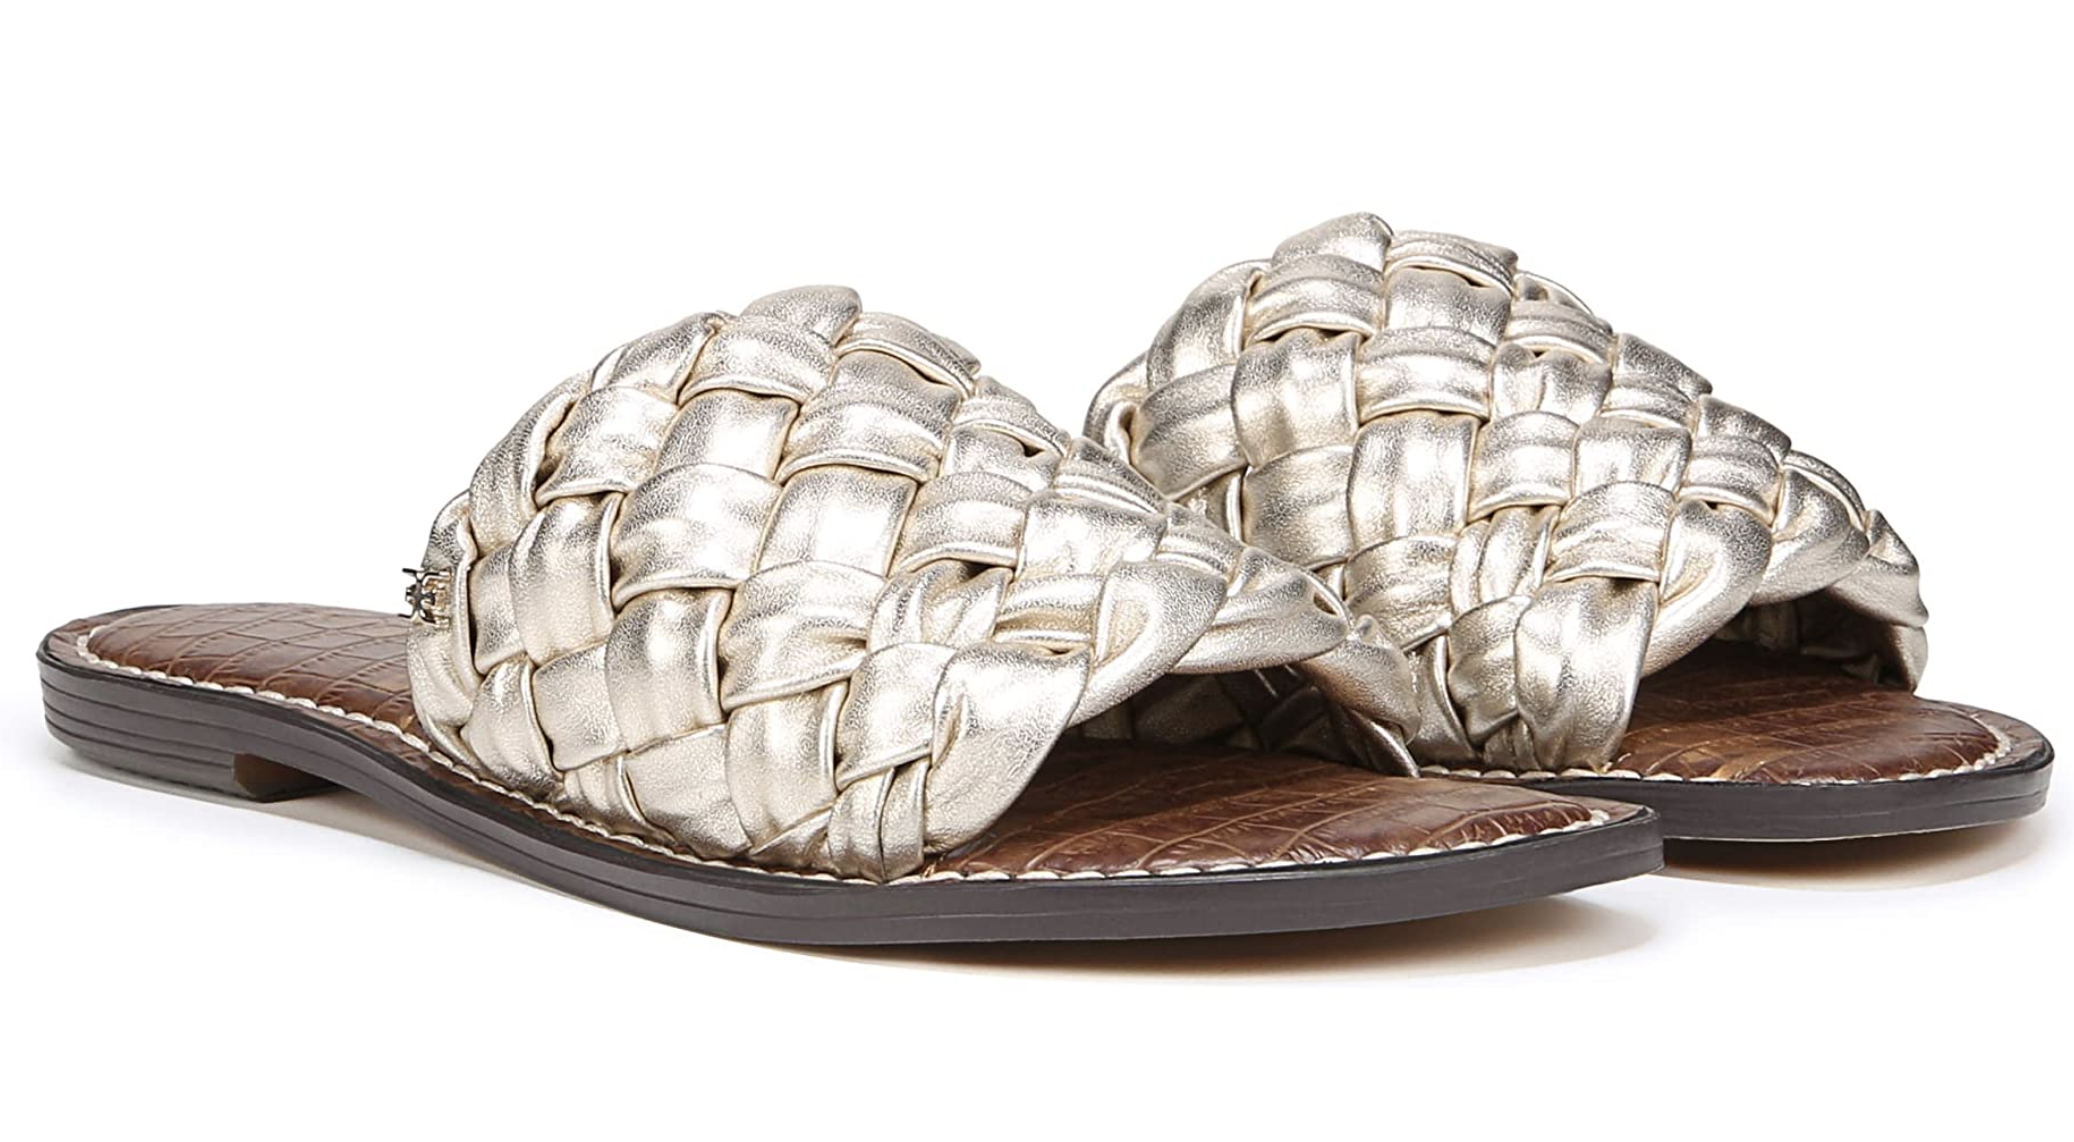 metallic shoes are on trend this spring 2023